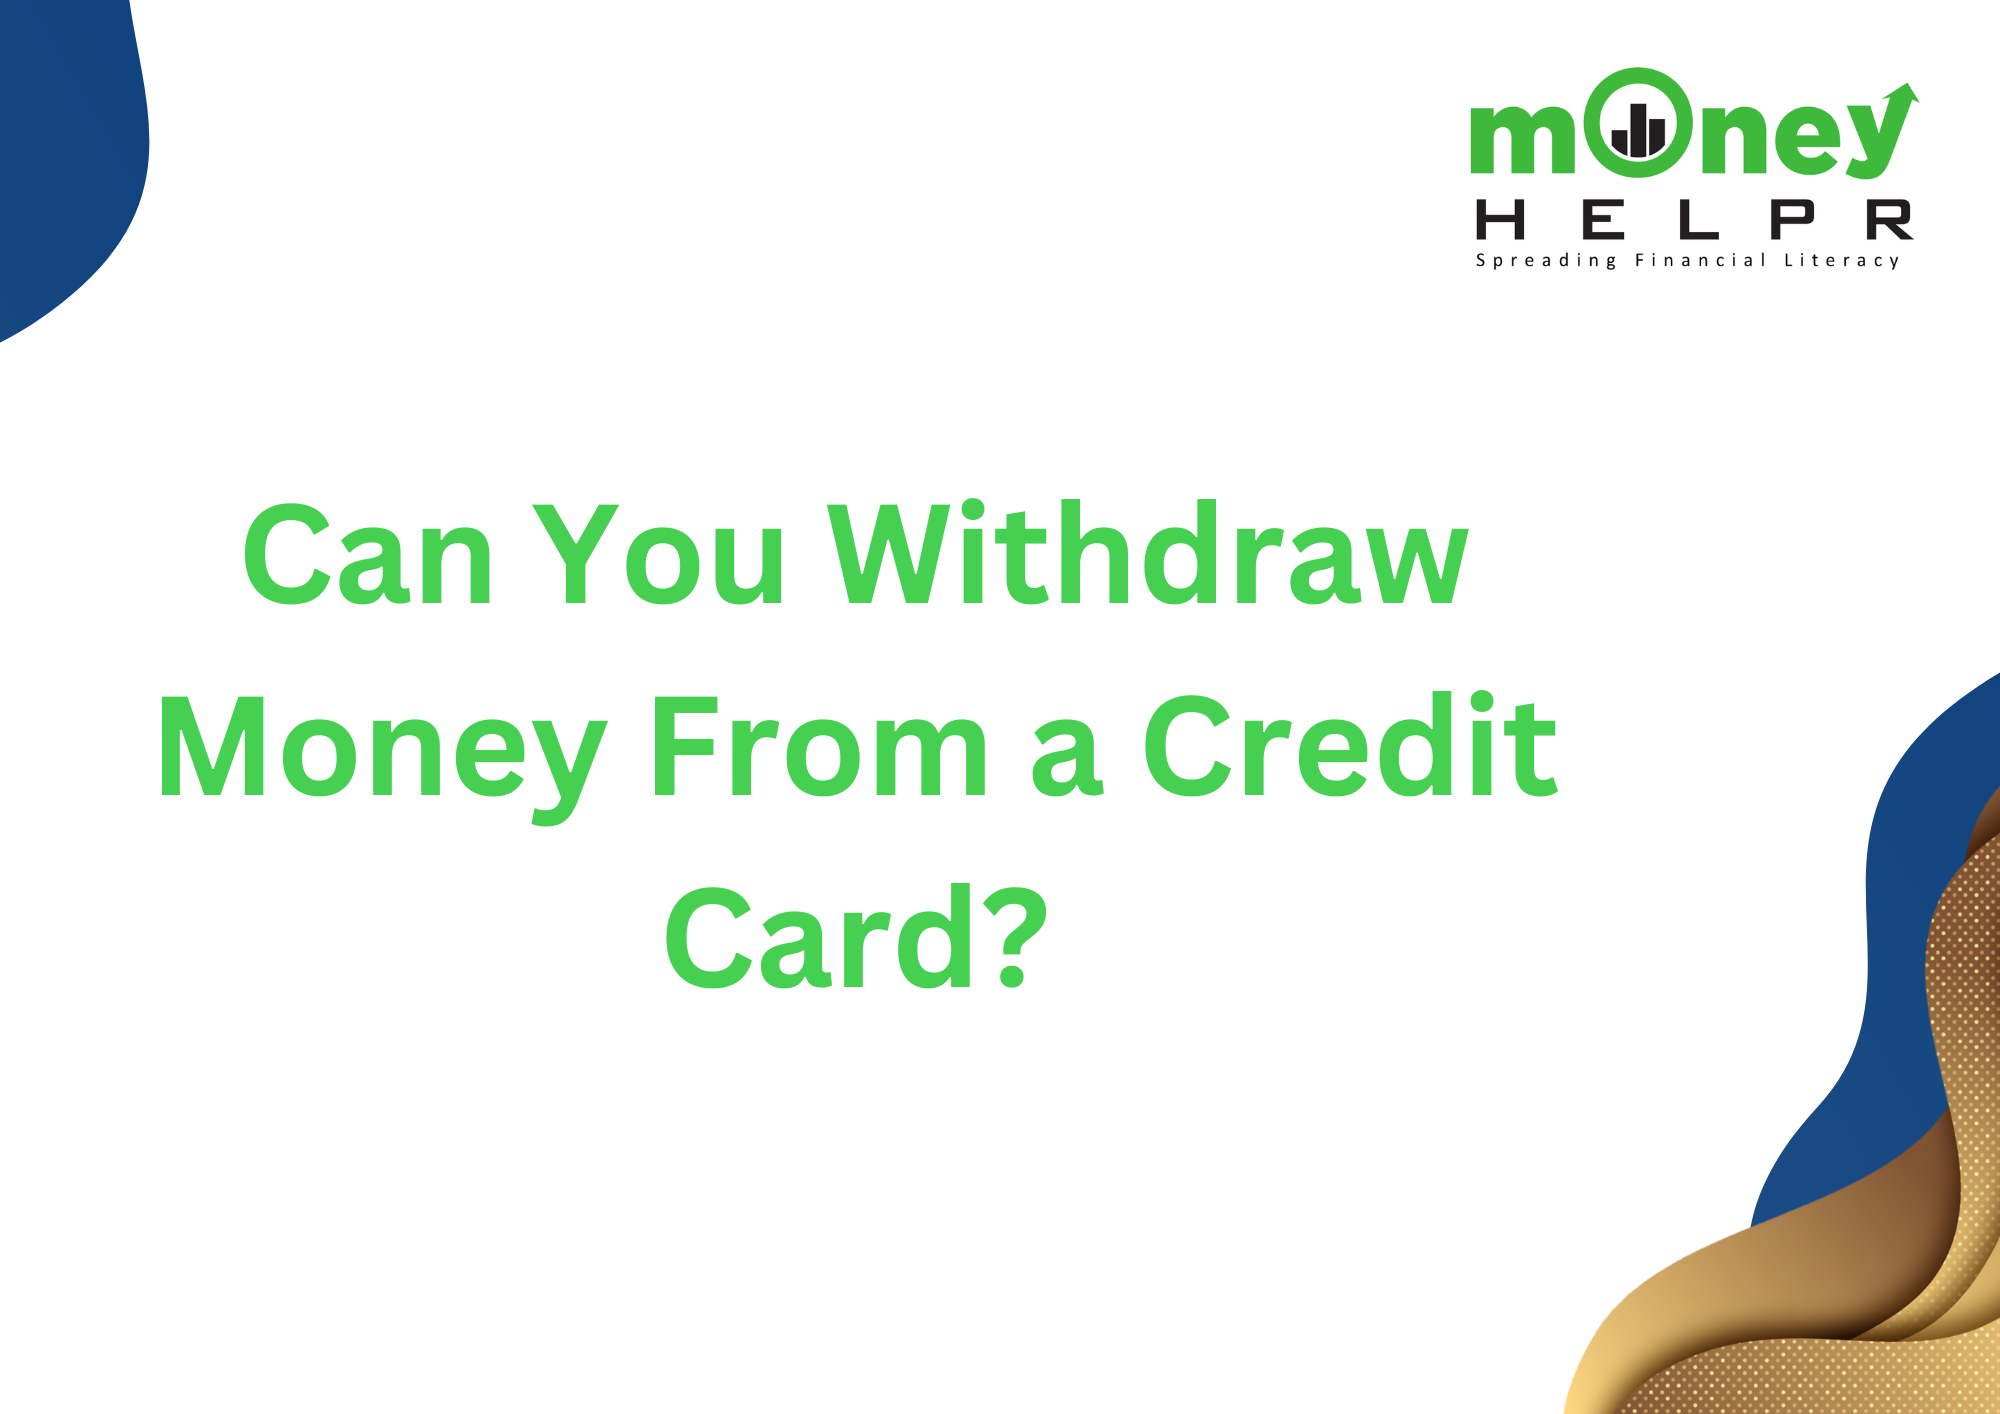 Can You Withdraw Money From a Credit Card?